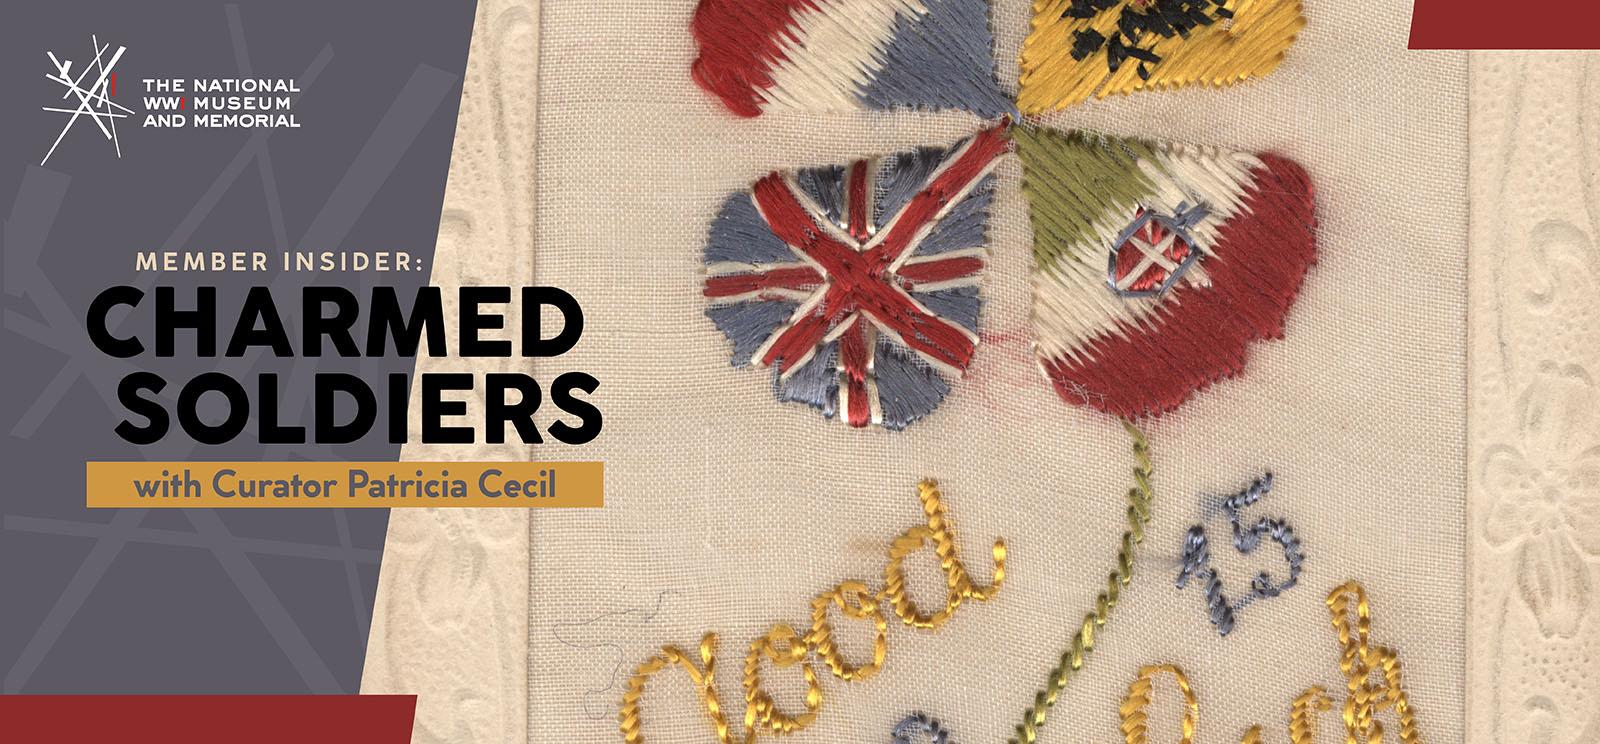 Image: Scan of a postcard embroidered with a silk four-leaf clover. The four leaves are done in the designs and colors of the French, Russian, Italian and United Kingdom's WWI-era flags. The text "Good Luck 1915" is embroidered in gold and blue silk. Text: "Member Insider: Charmed Soldiers with Curator Patricia Cecil"